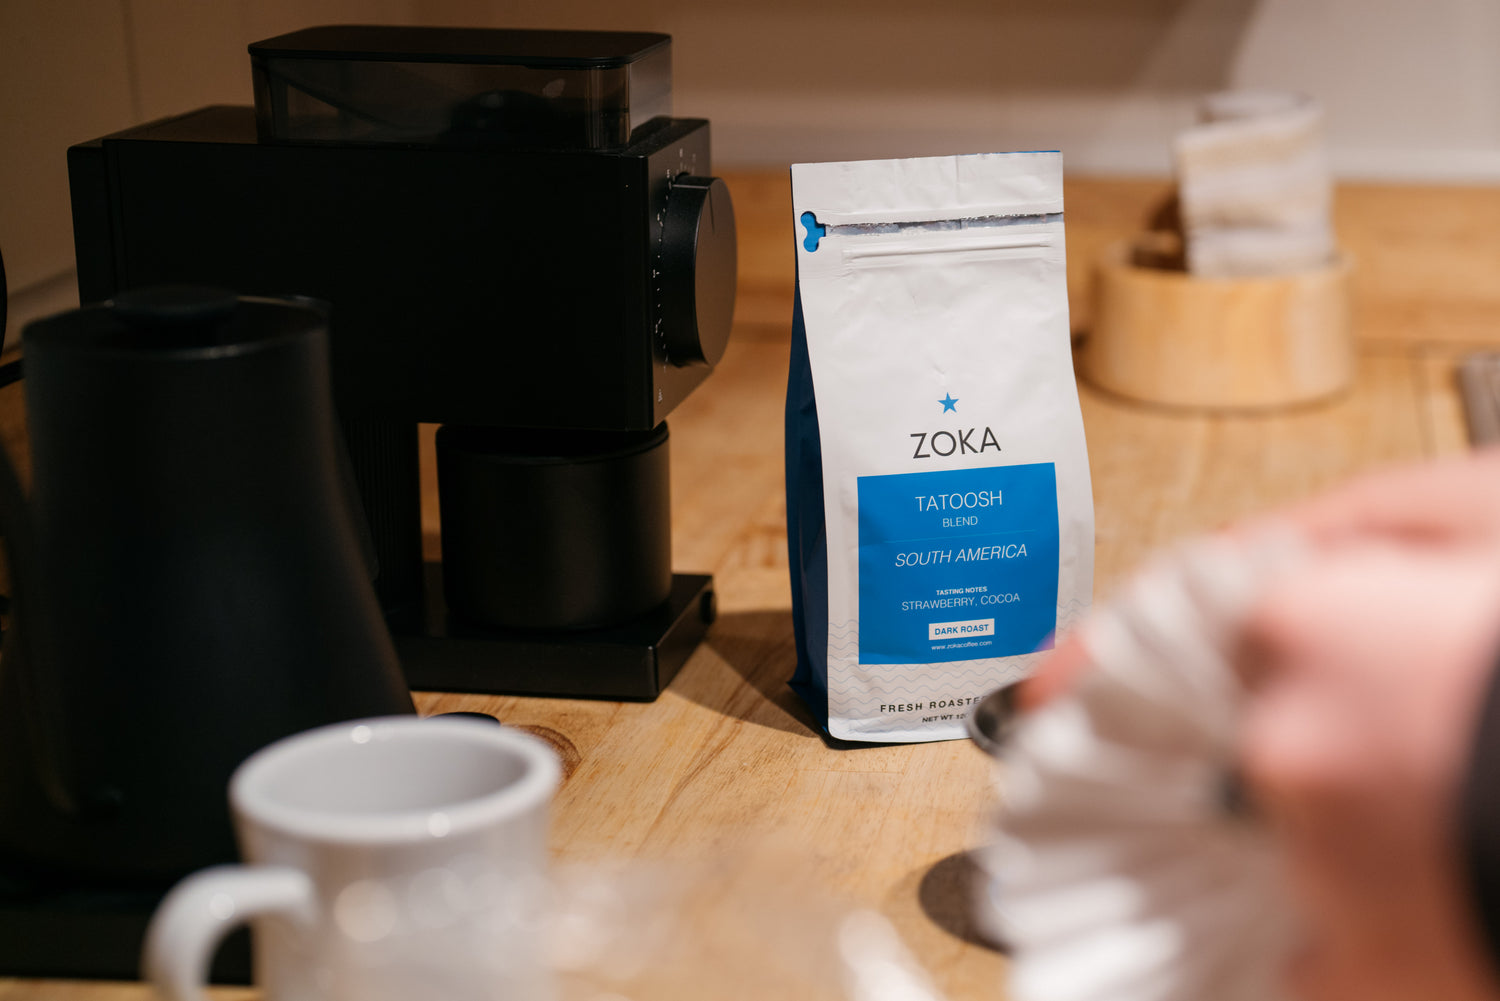 Pour Over Brewing Kit – Zoka Coffee Company